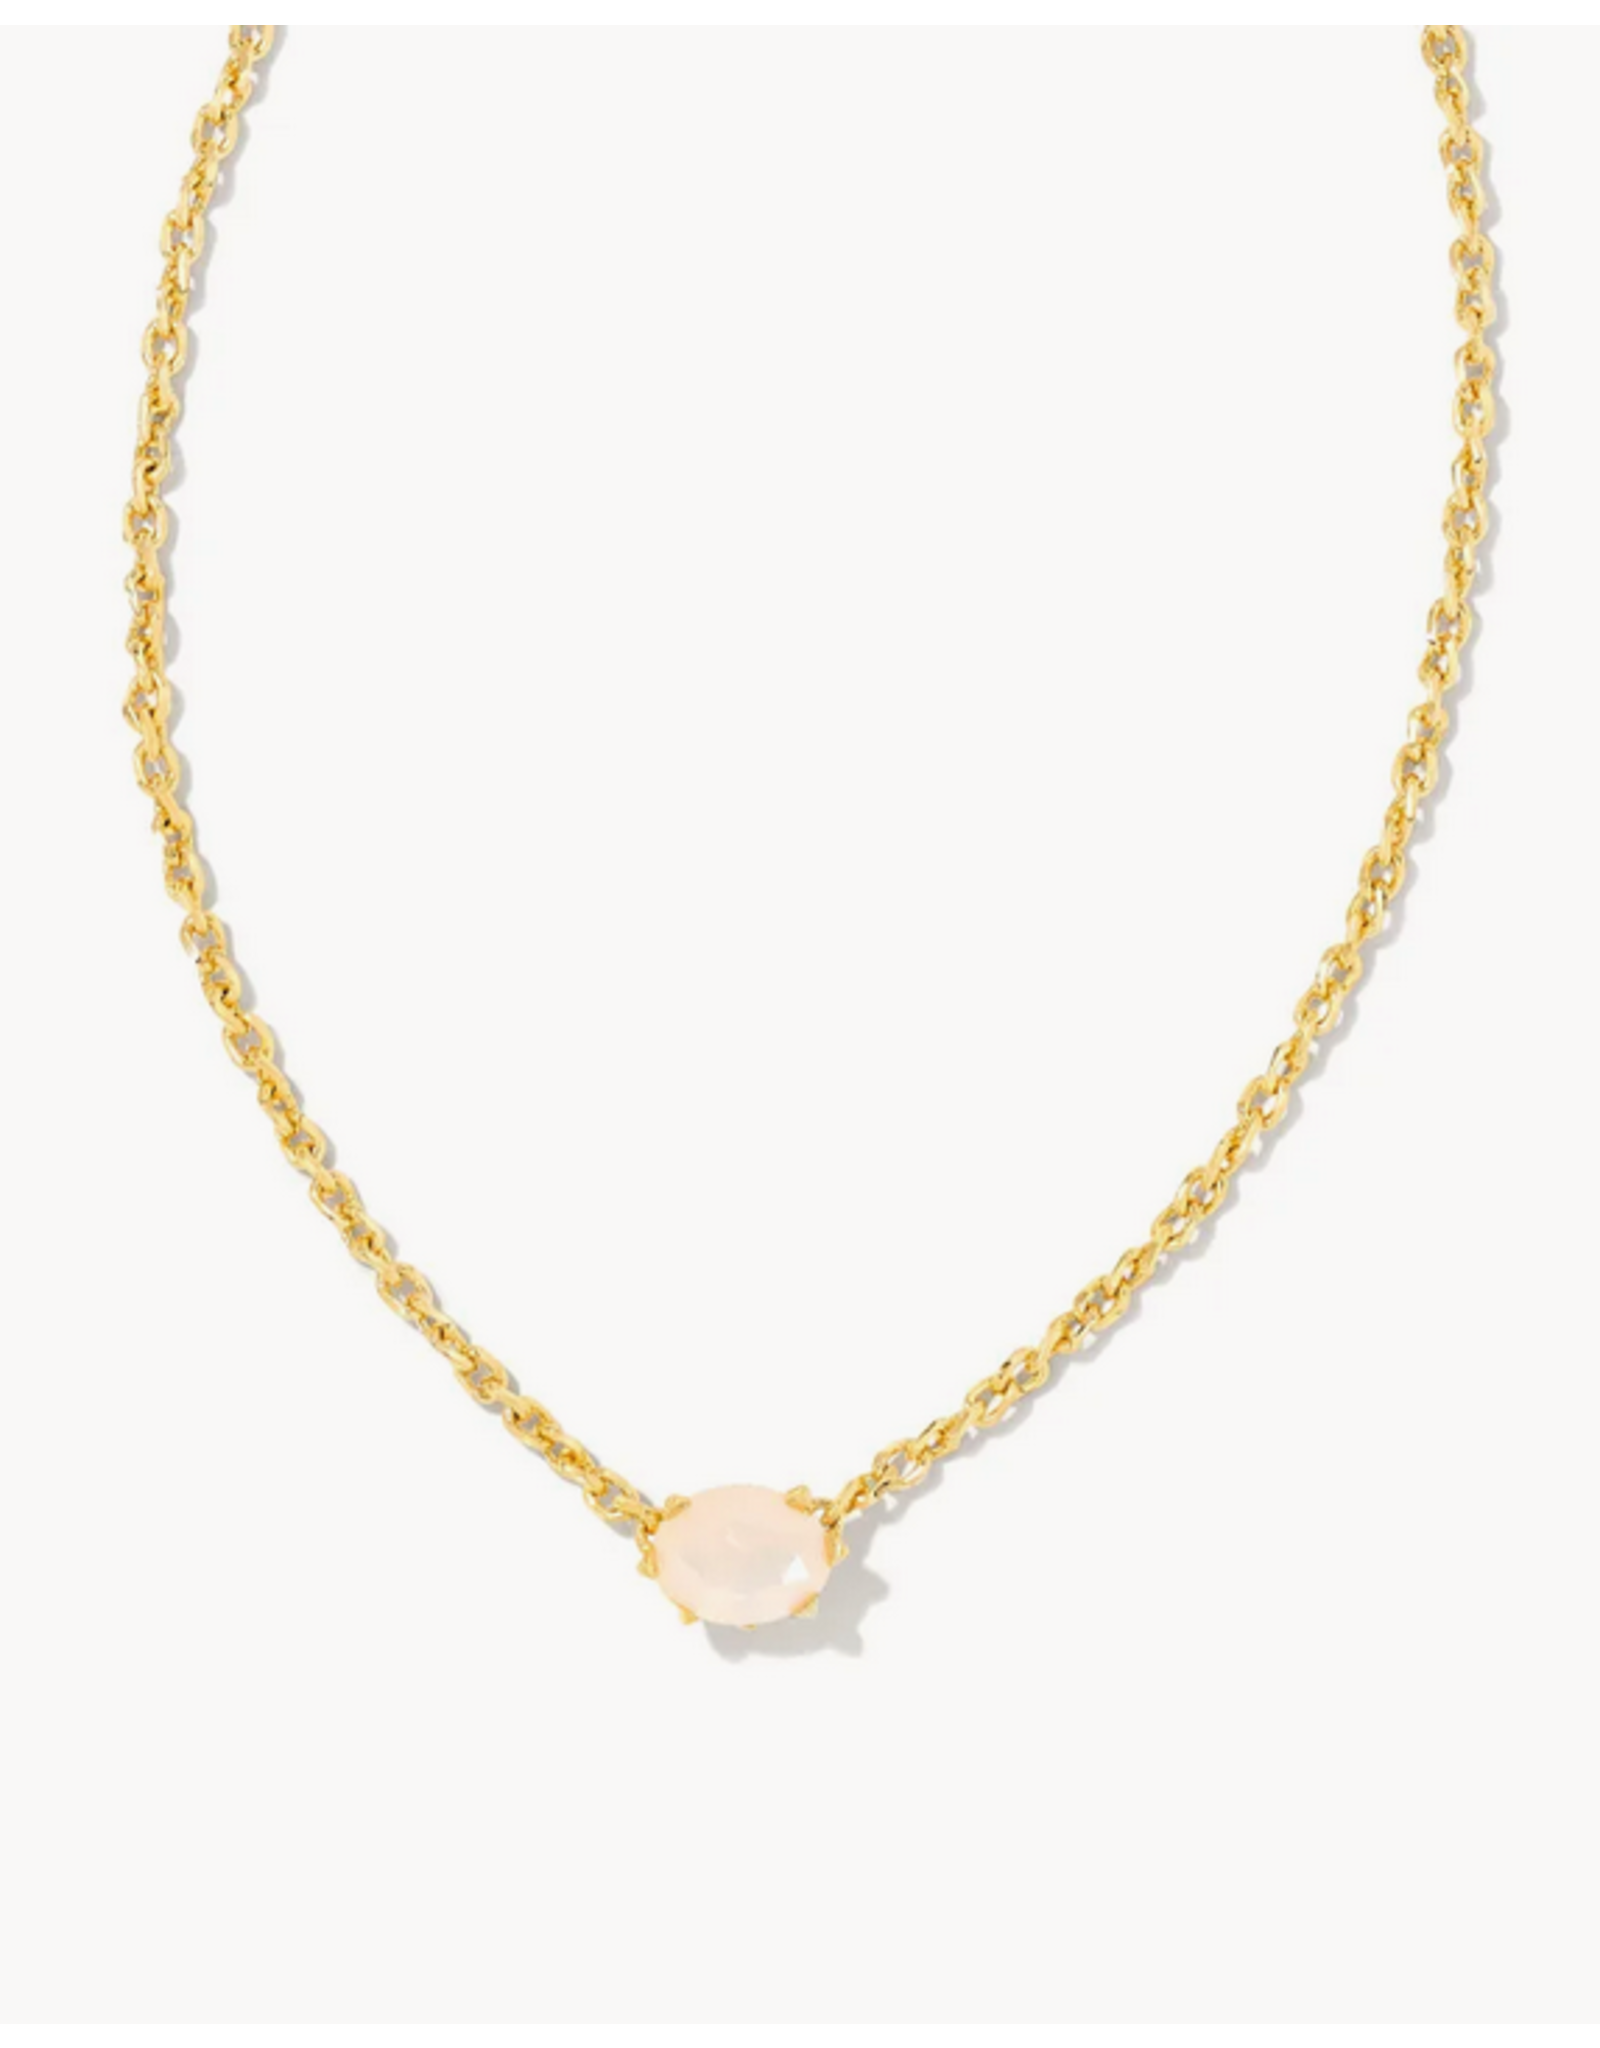 Kendra Scott Cailin Necklace Champagne Opal Crystal on Gold (OCT.)